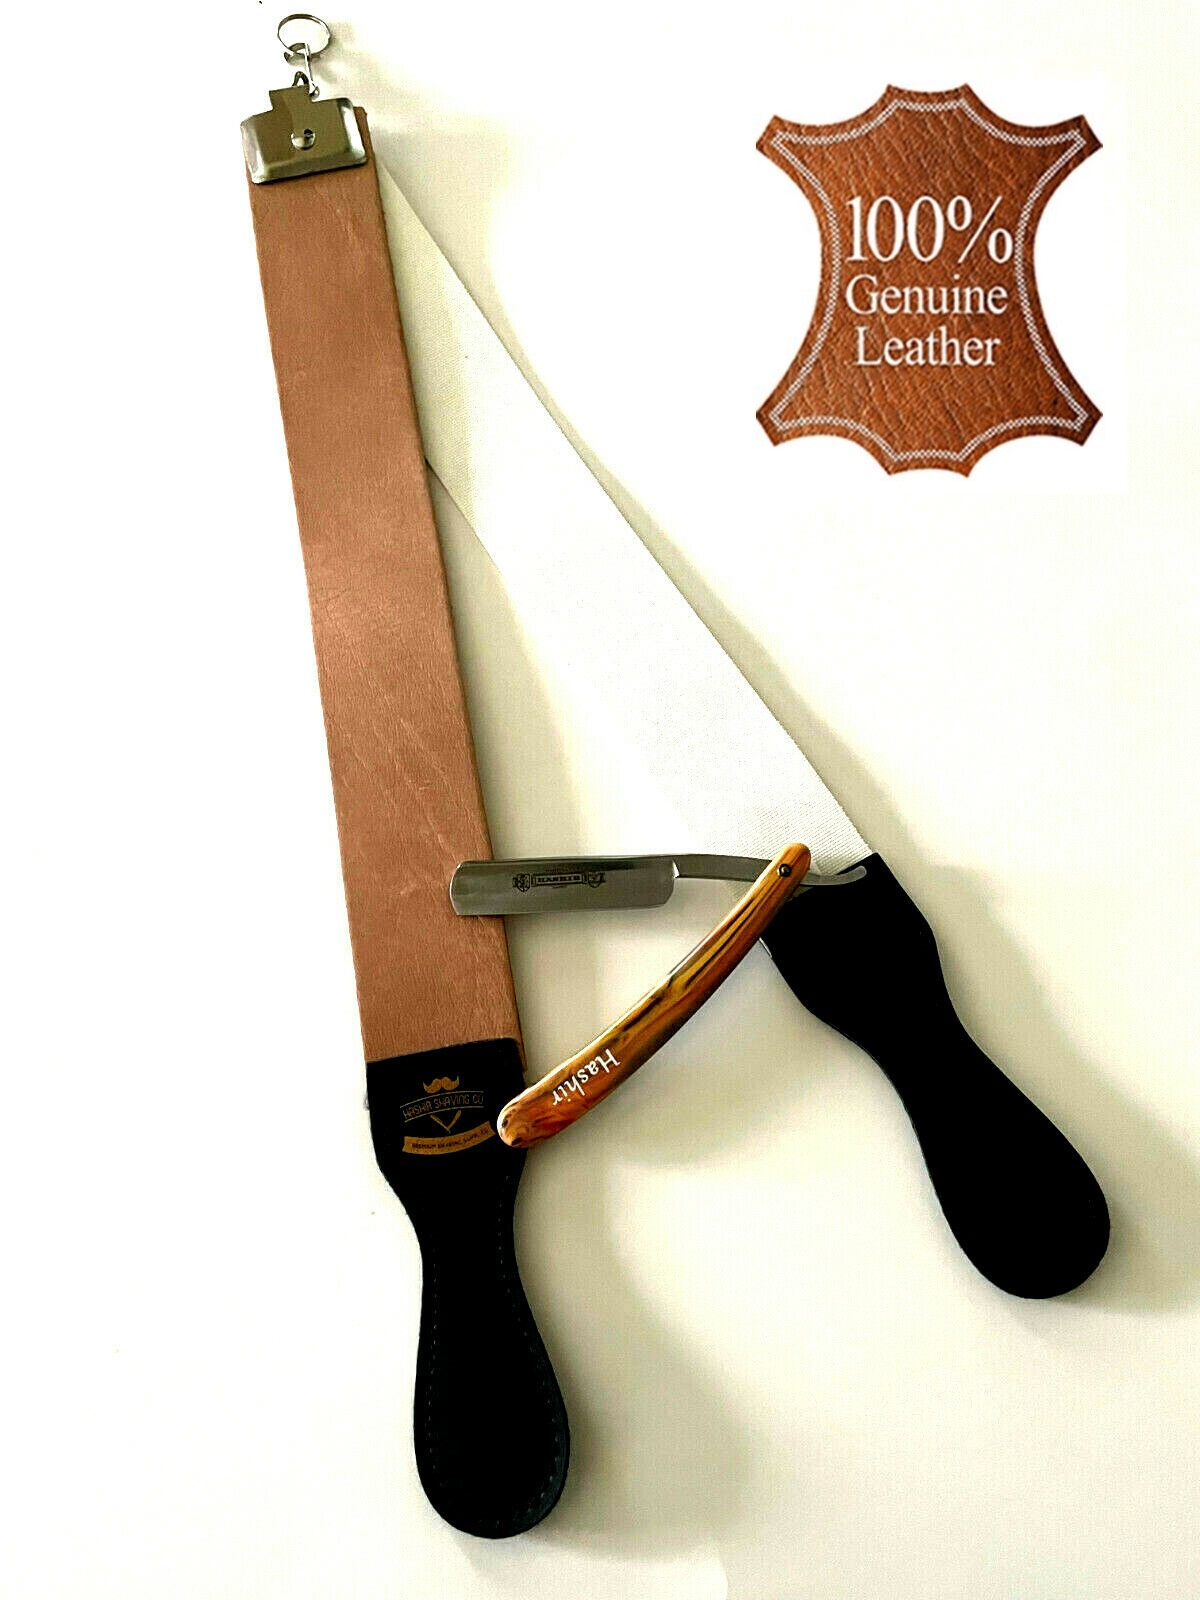 Barber's Professional Leather Shaping Strop - Hashir Products